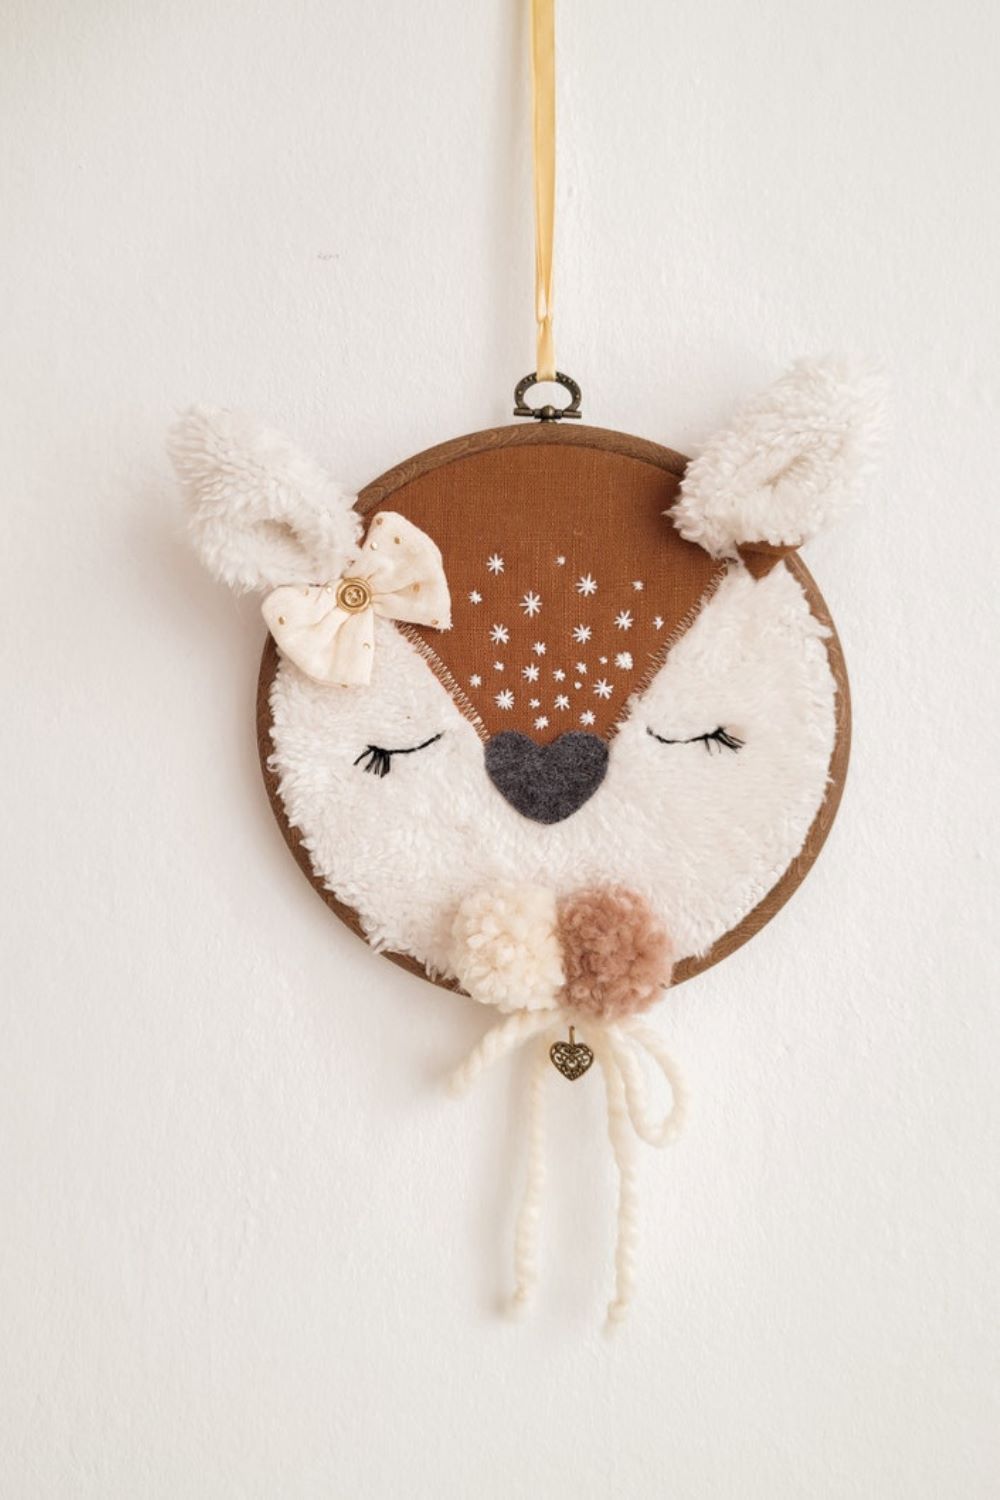 Deer embroidery on a hoop with plush ears by Lulano